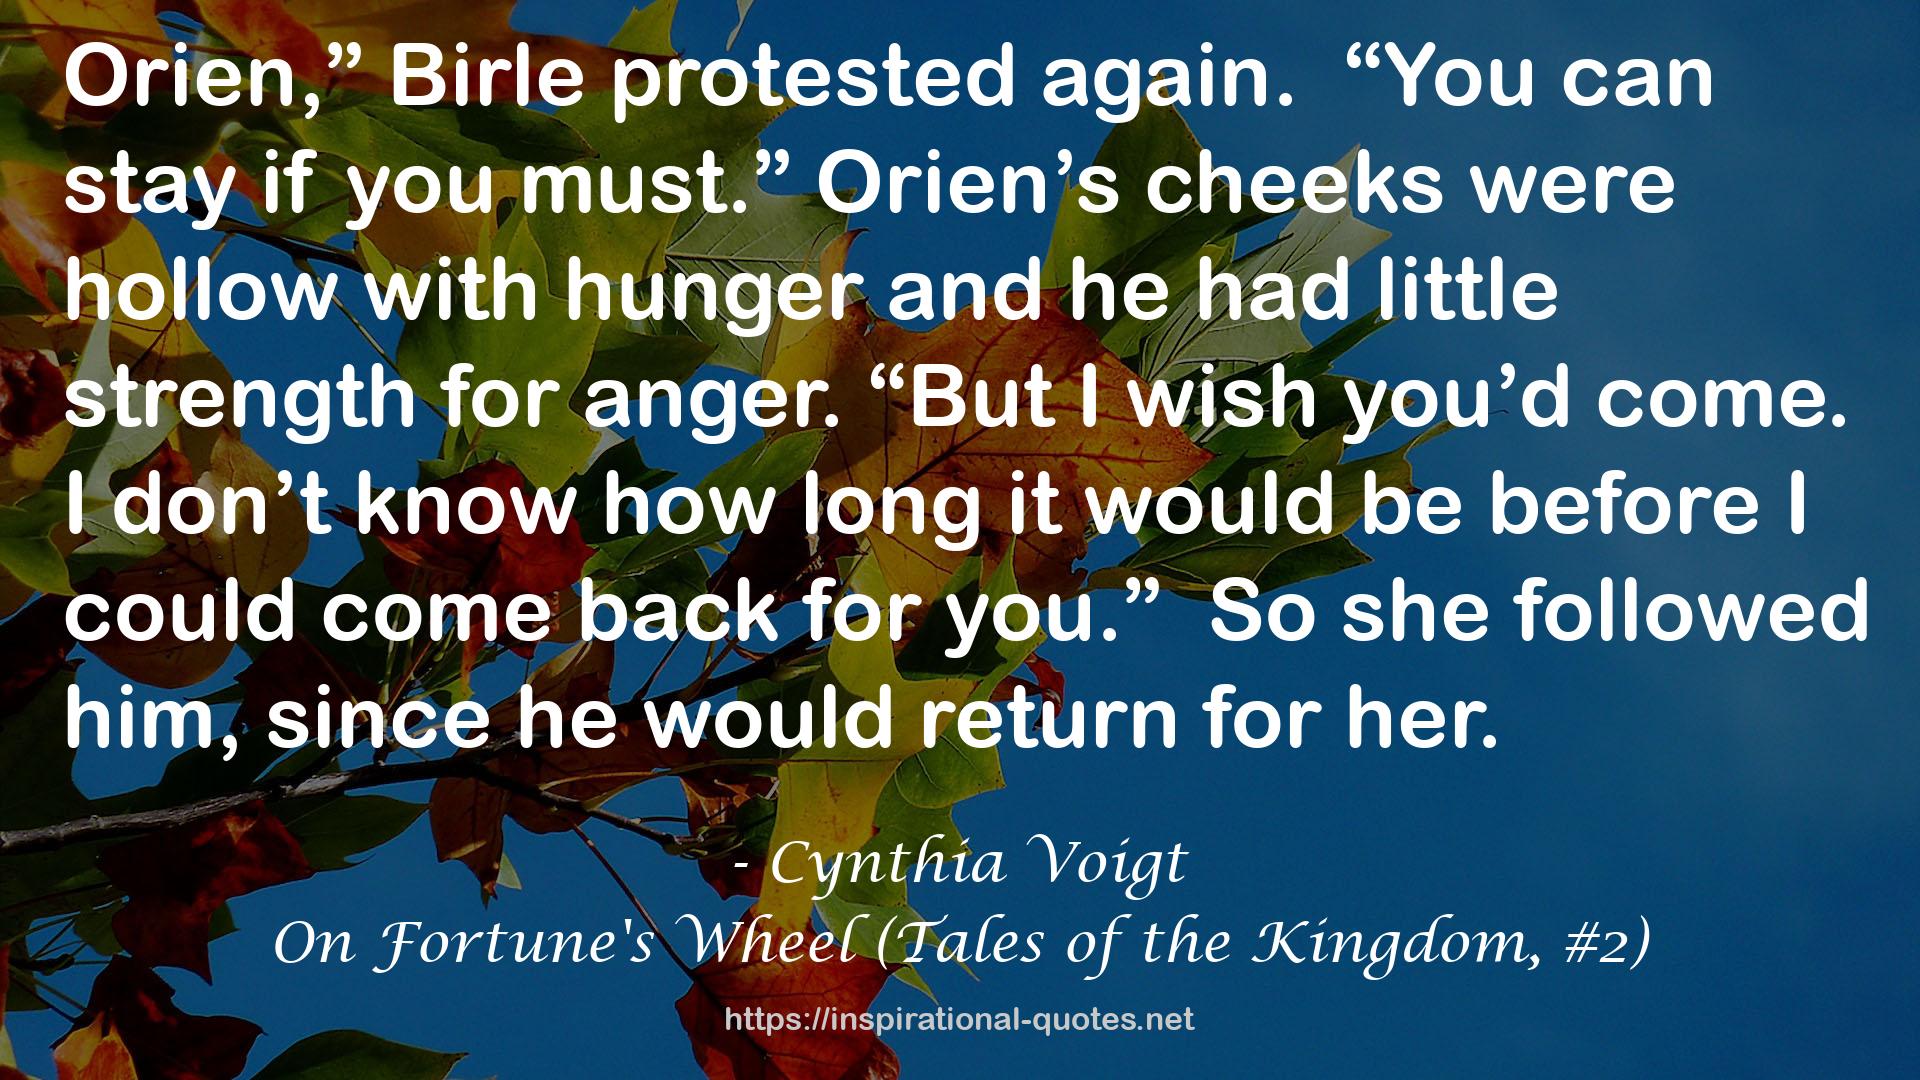 On Fortune's Wheel (Tales of the Kingdom, #2) QUOTES